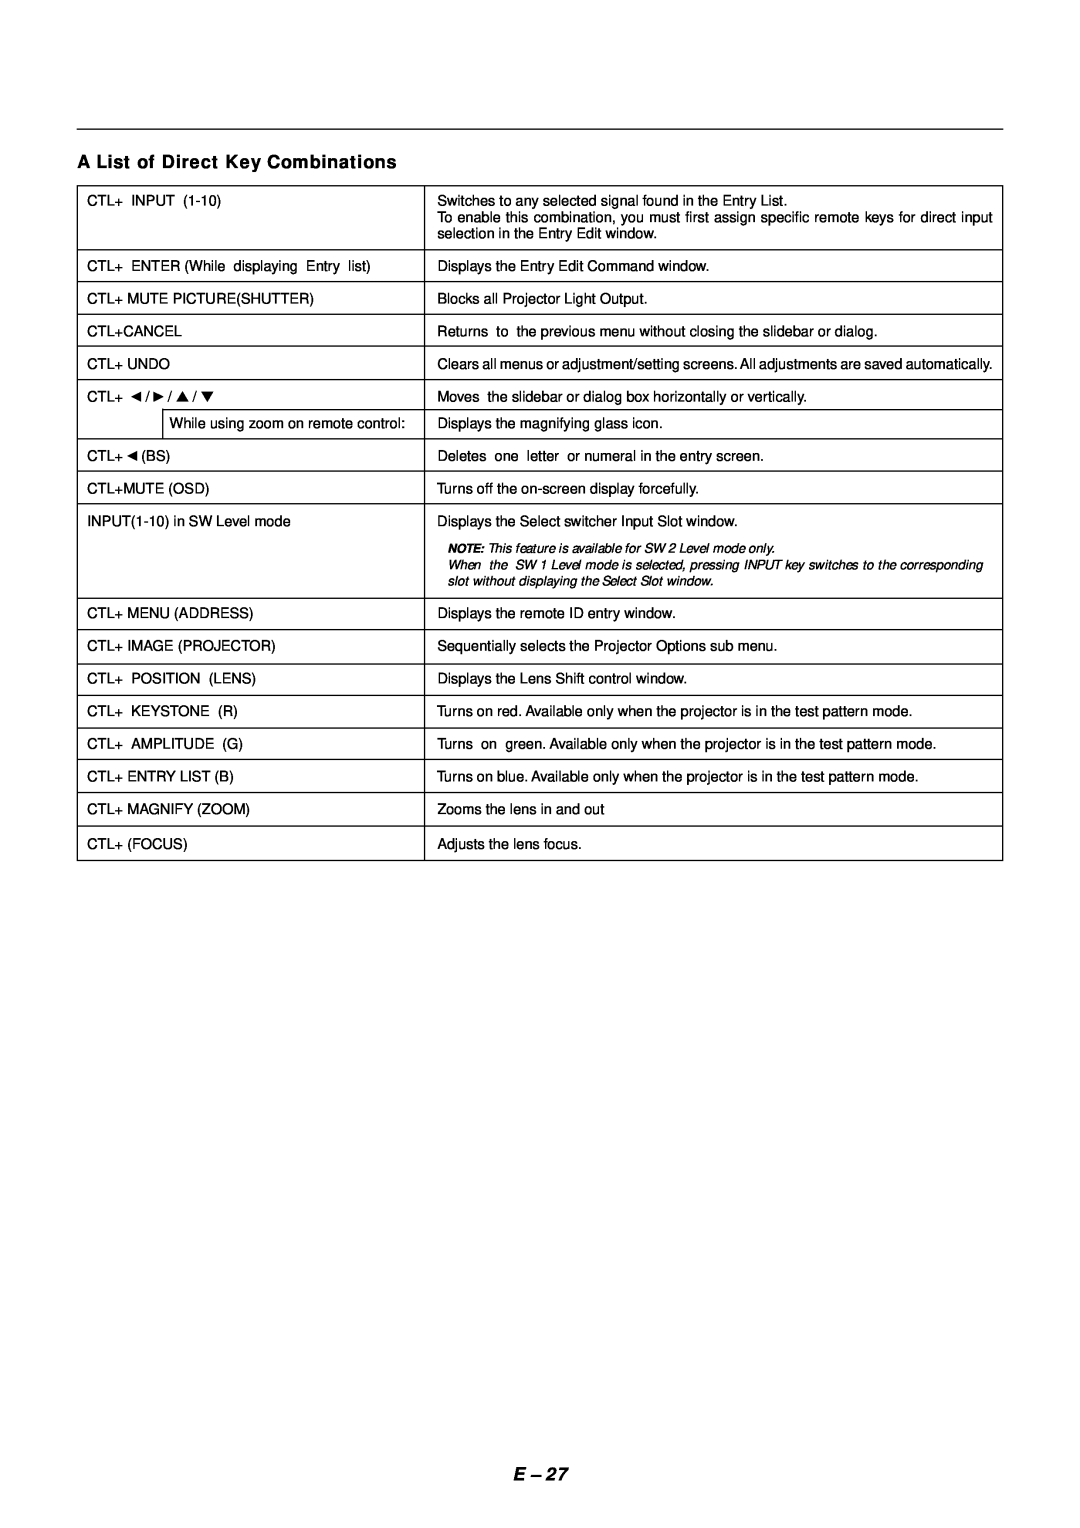 NEC SX4000 user manual A List of Direct Key Combinations, NOTE This feature is available for SW 2 Level mode only 